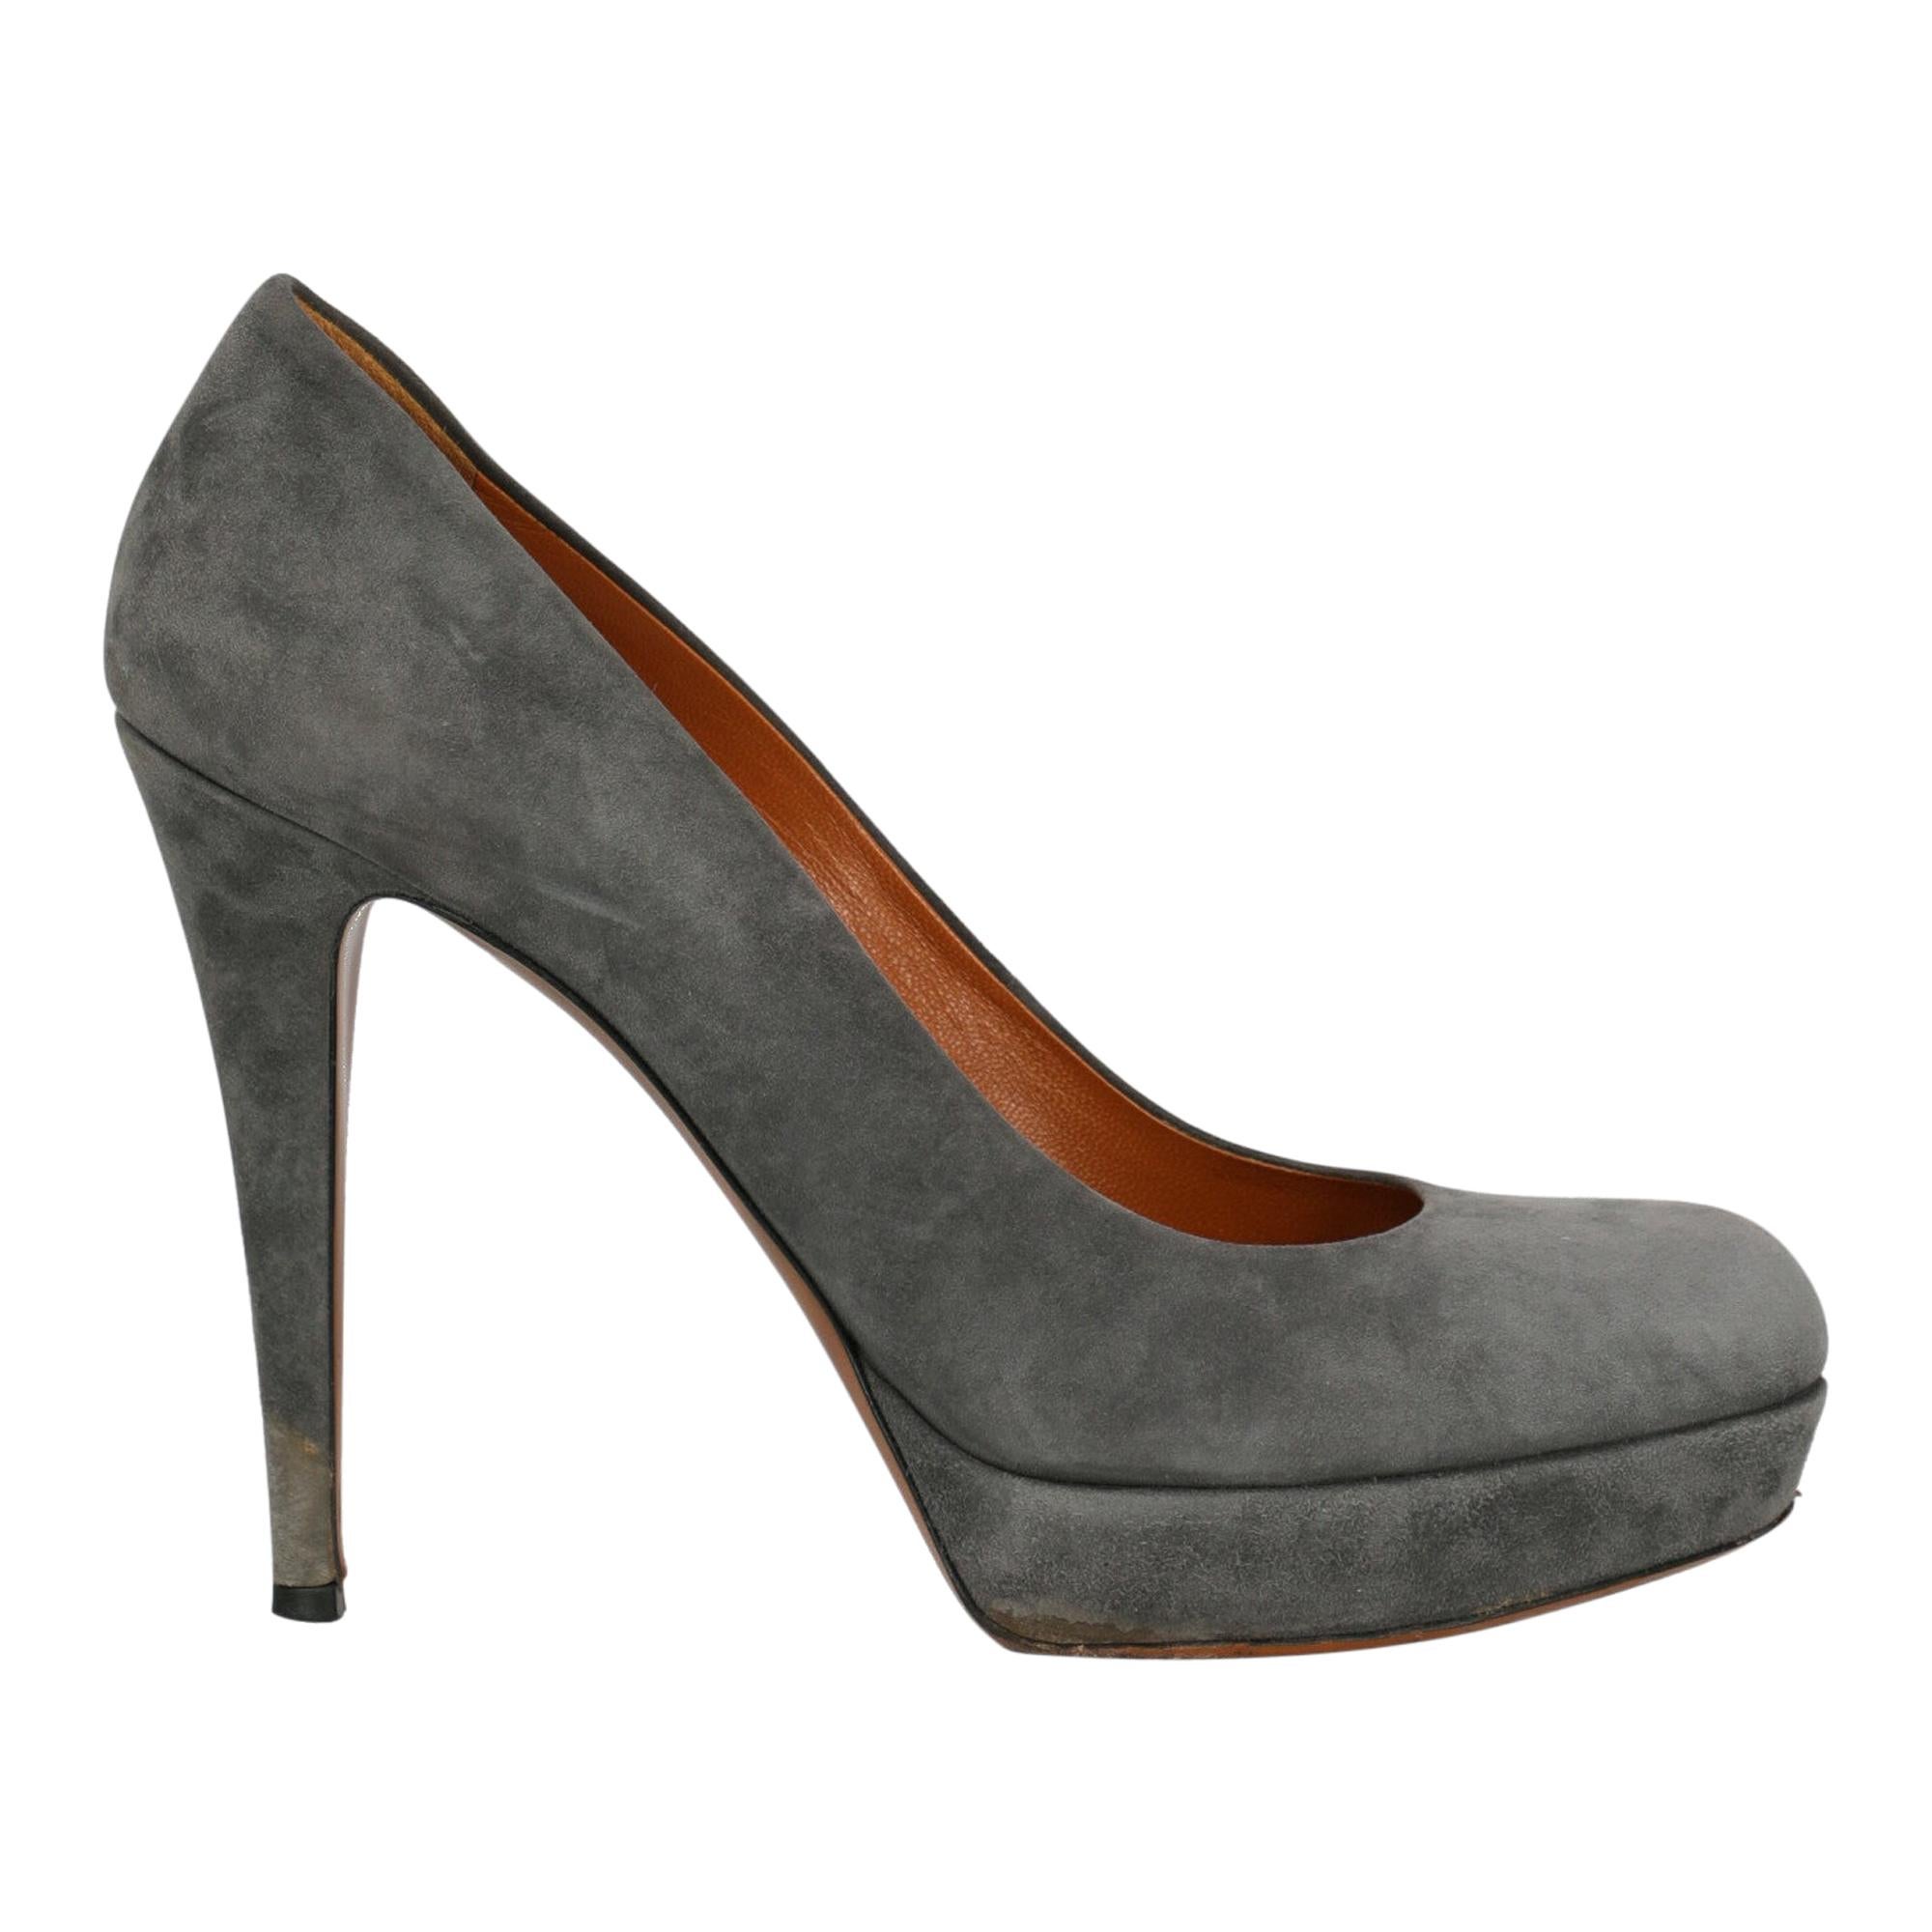 Gucci Woman Pumps Grey Leather IT 39.5